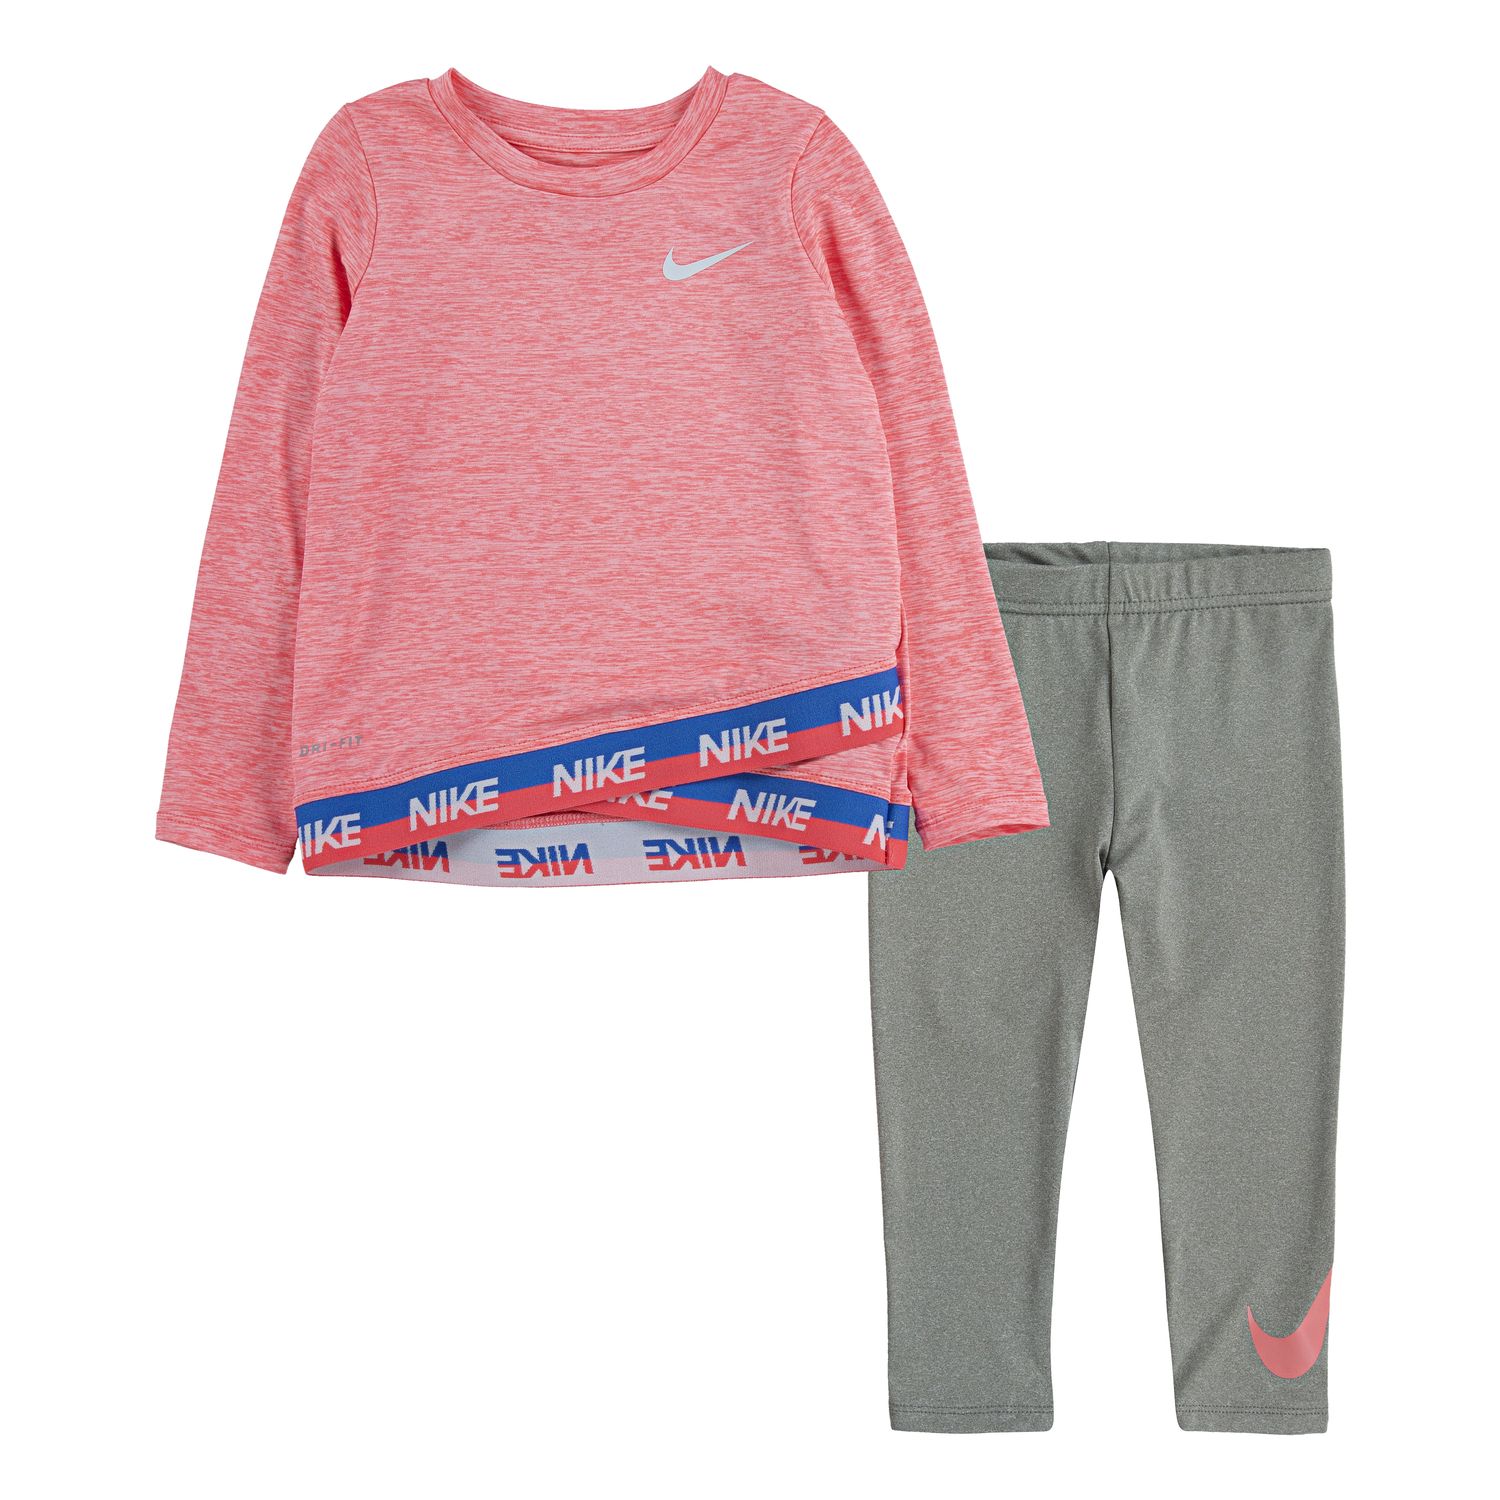 athletic clothes for tweens